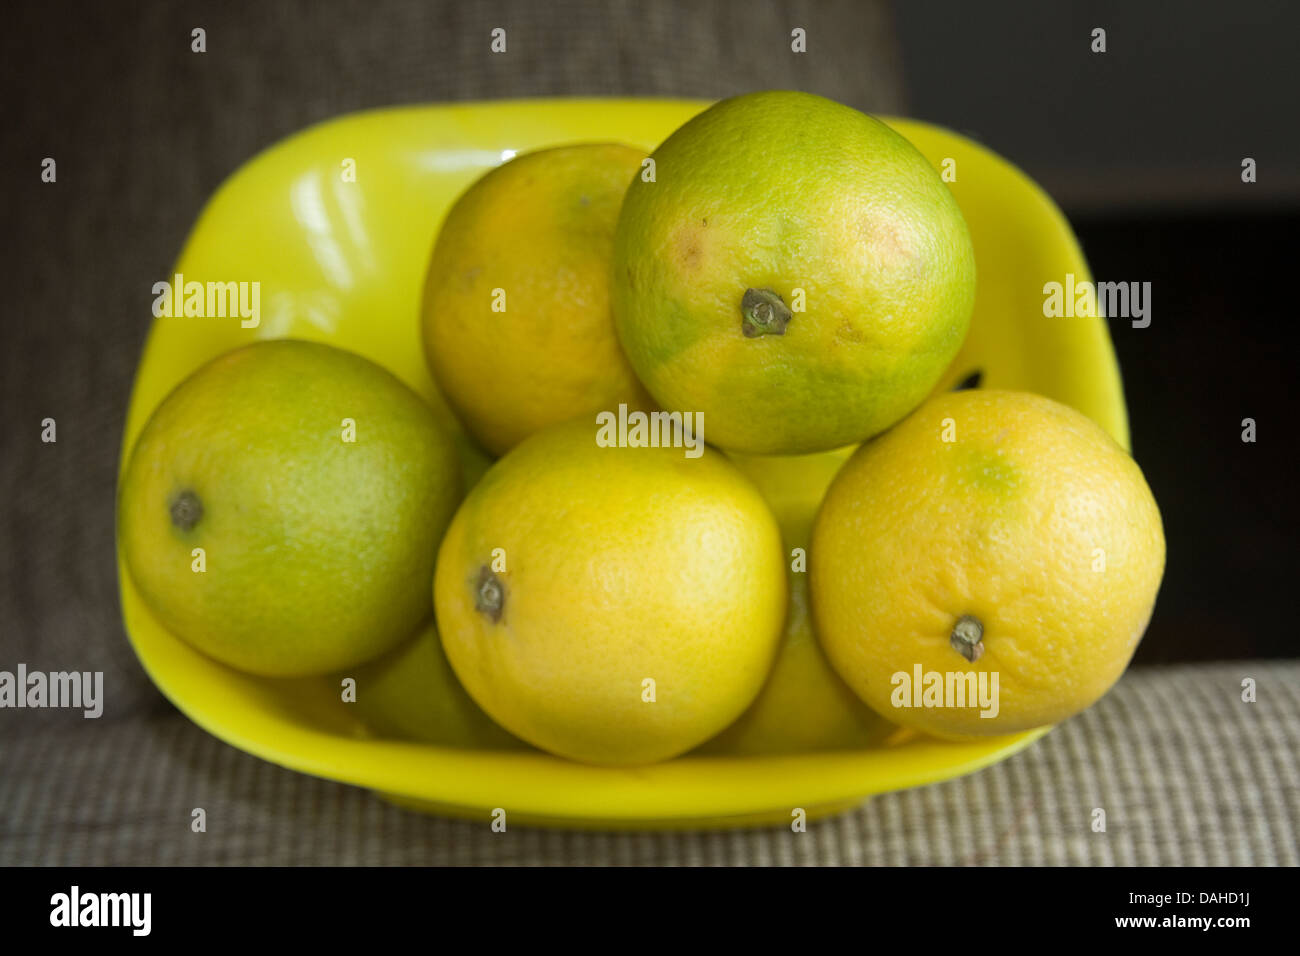 Yellow and greenish sweet lemons placed in yellow plastic tray Stock Photo